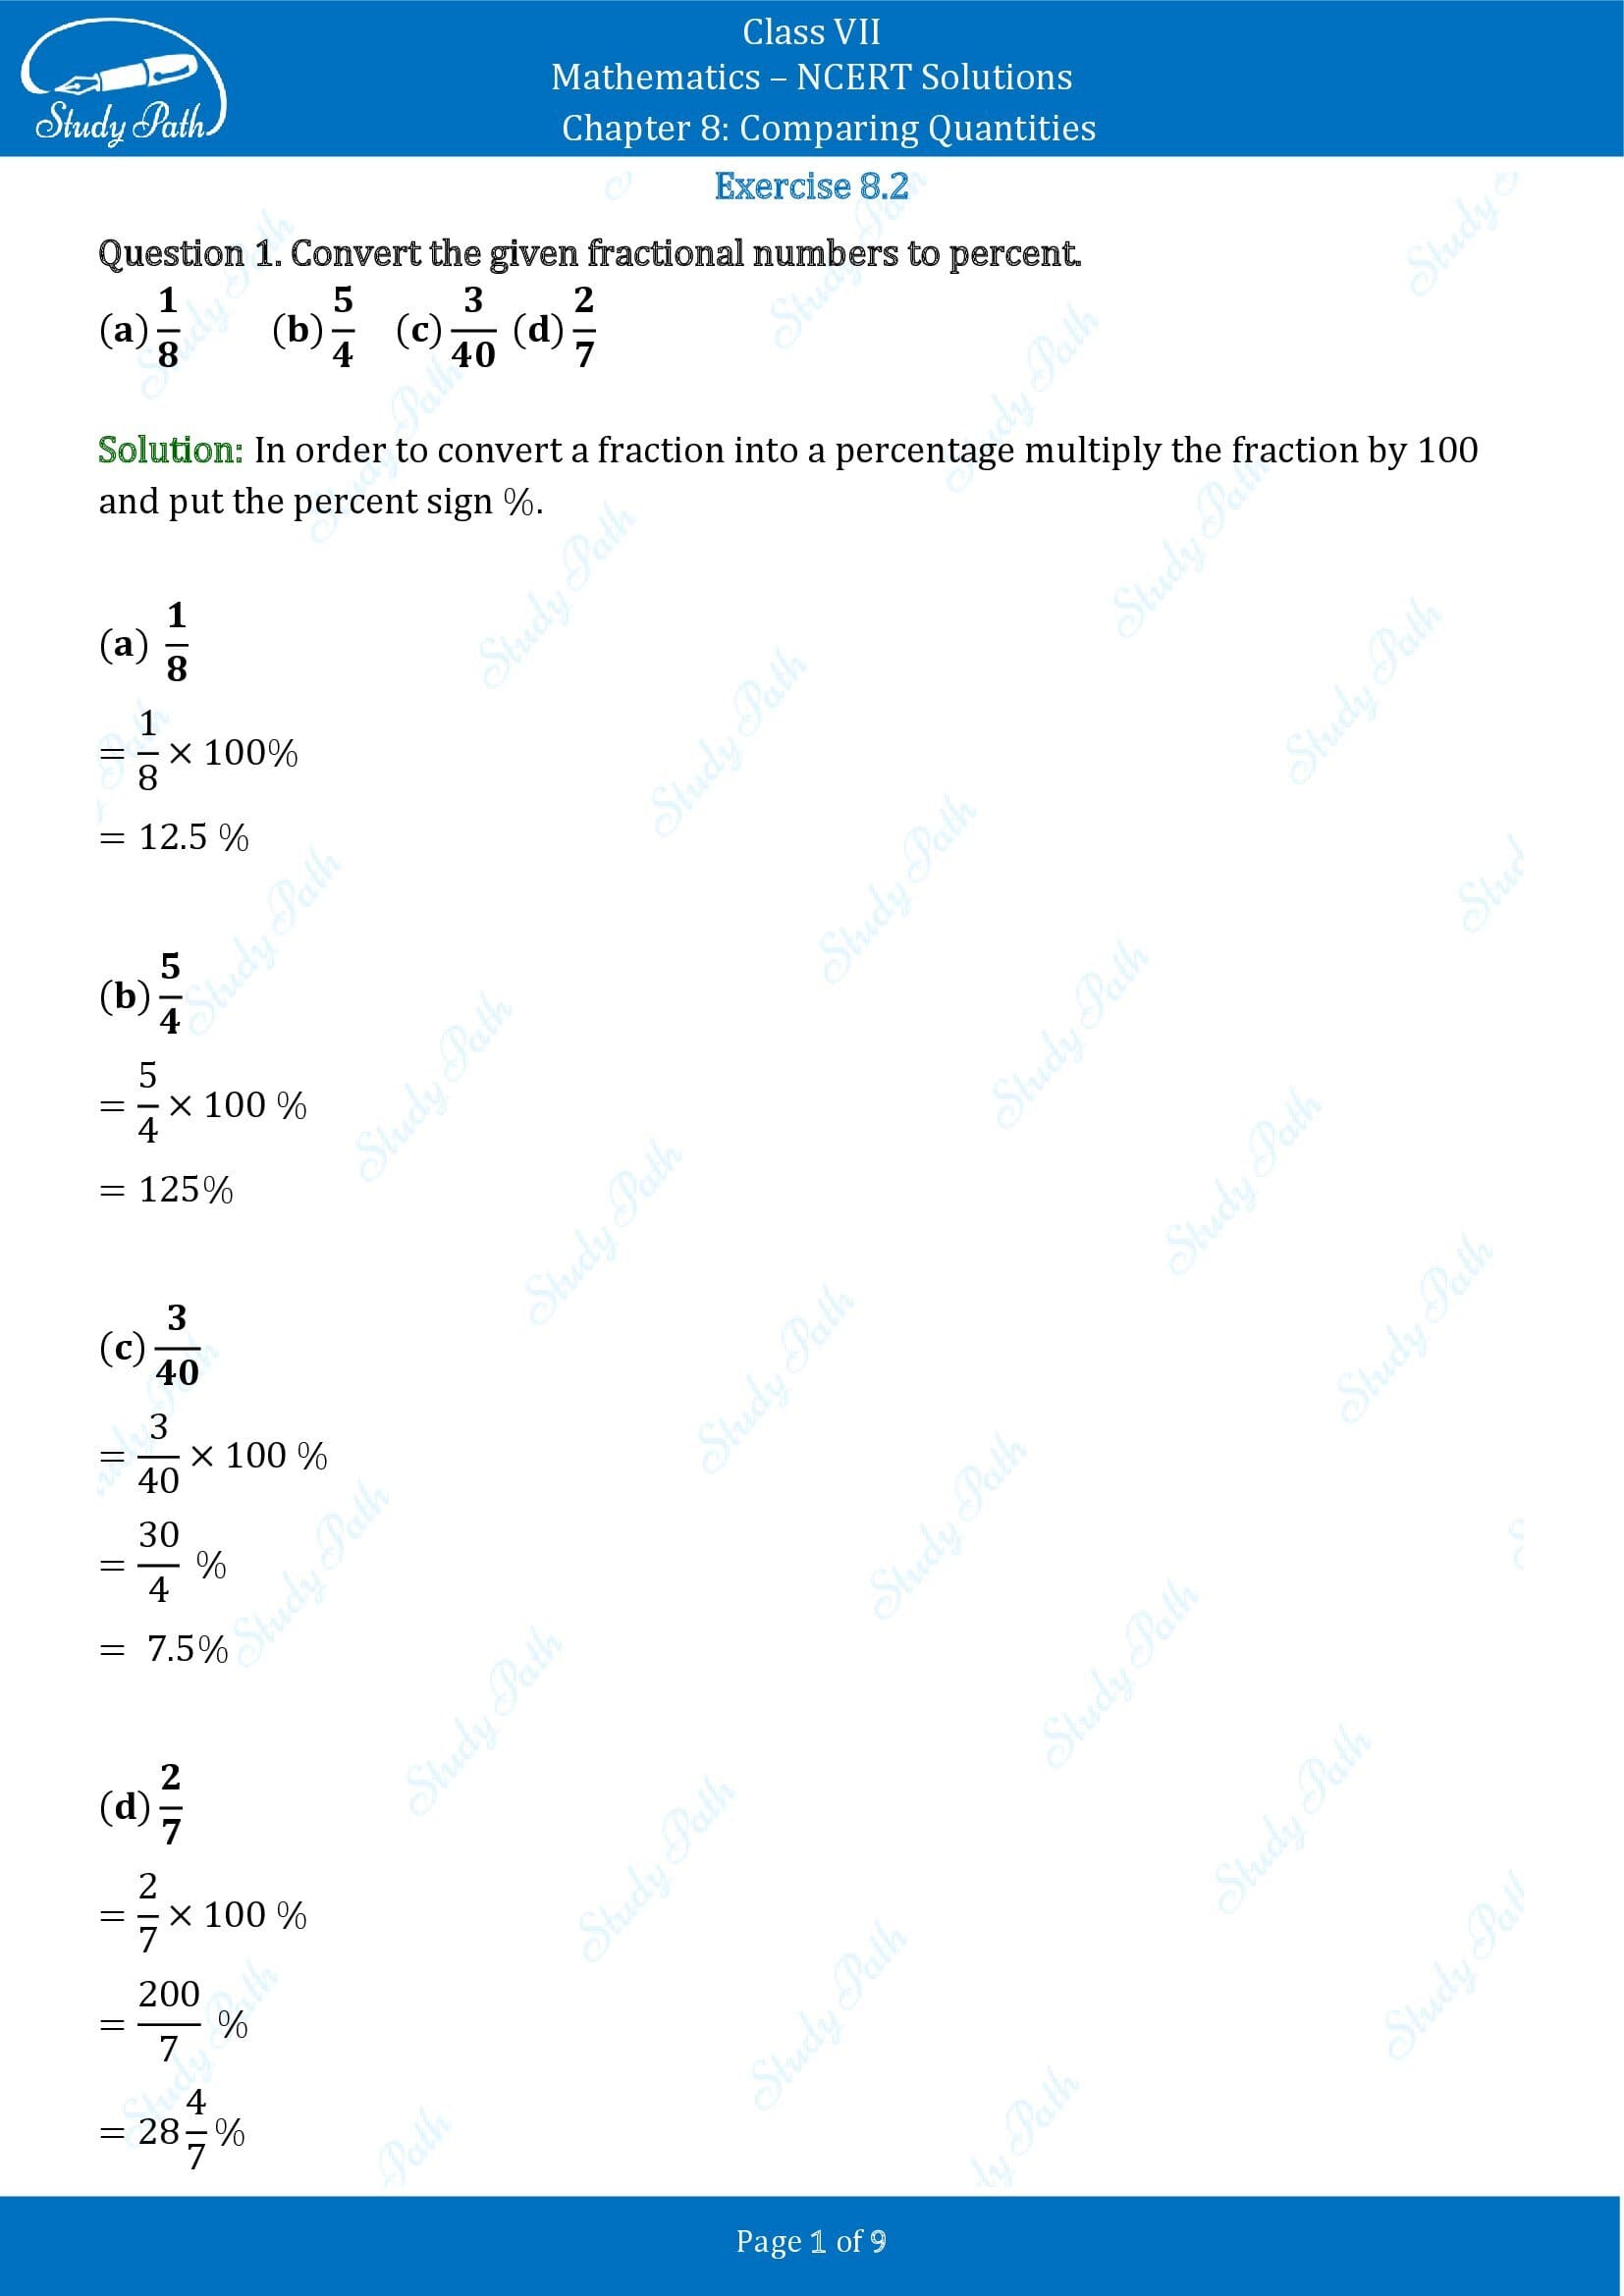 NCERT Solutions for Class 7 Maths Chapter 8 Comparing Quantities Exercise 8.2 00001